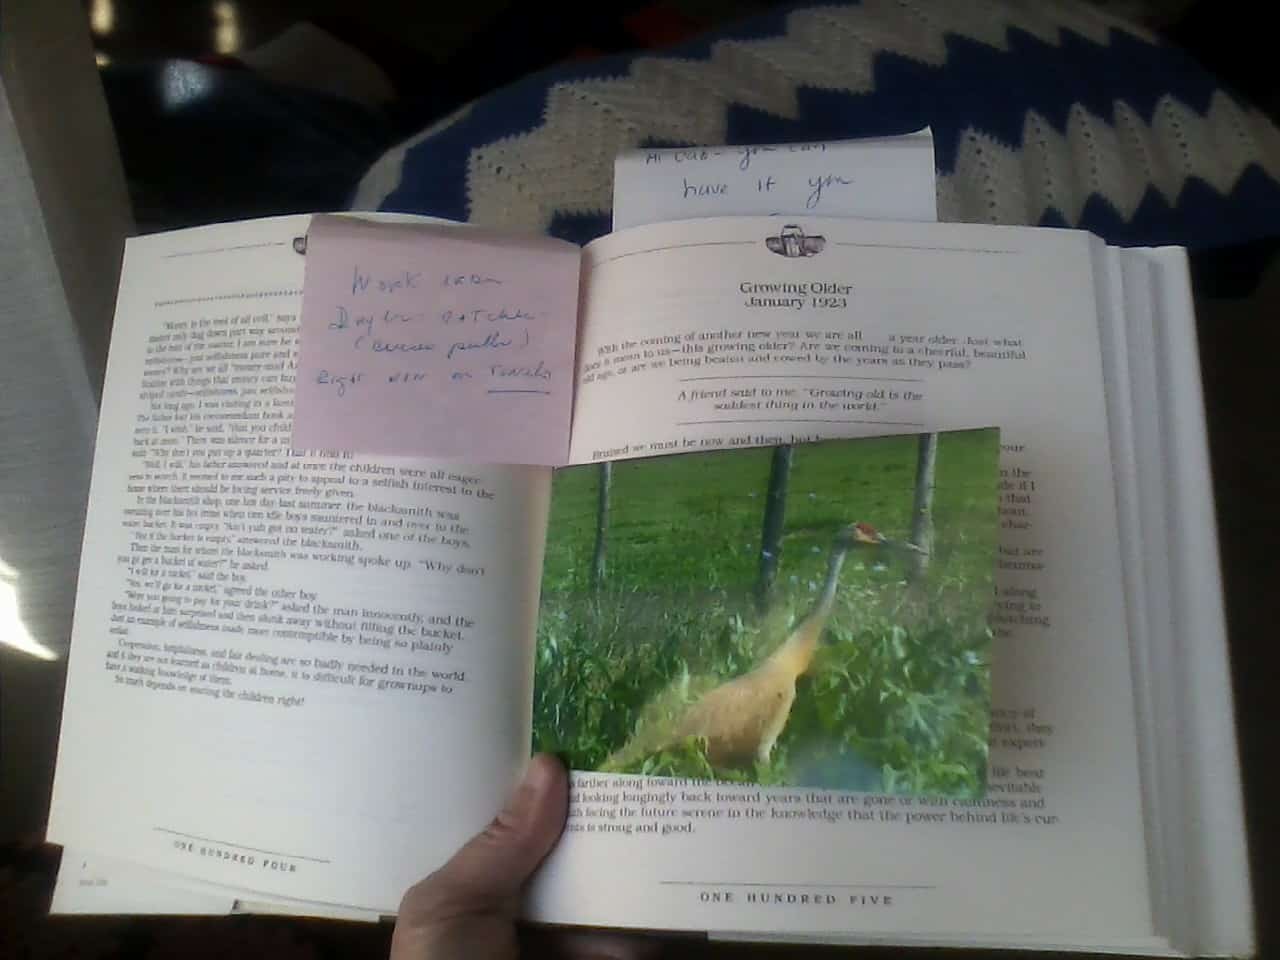 A book open, also showing a picture of a crane and a handwritten note. From Doreen Mary Frick